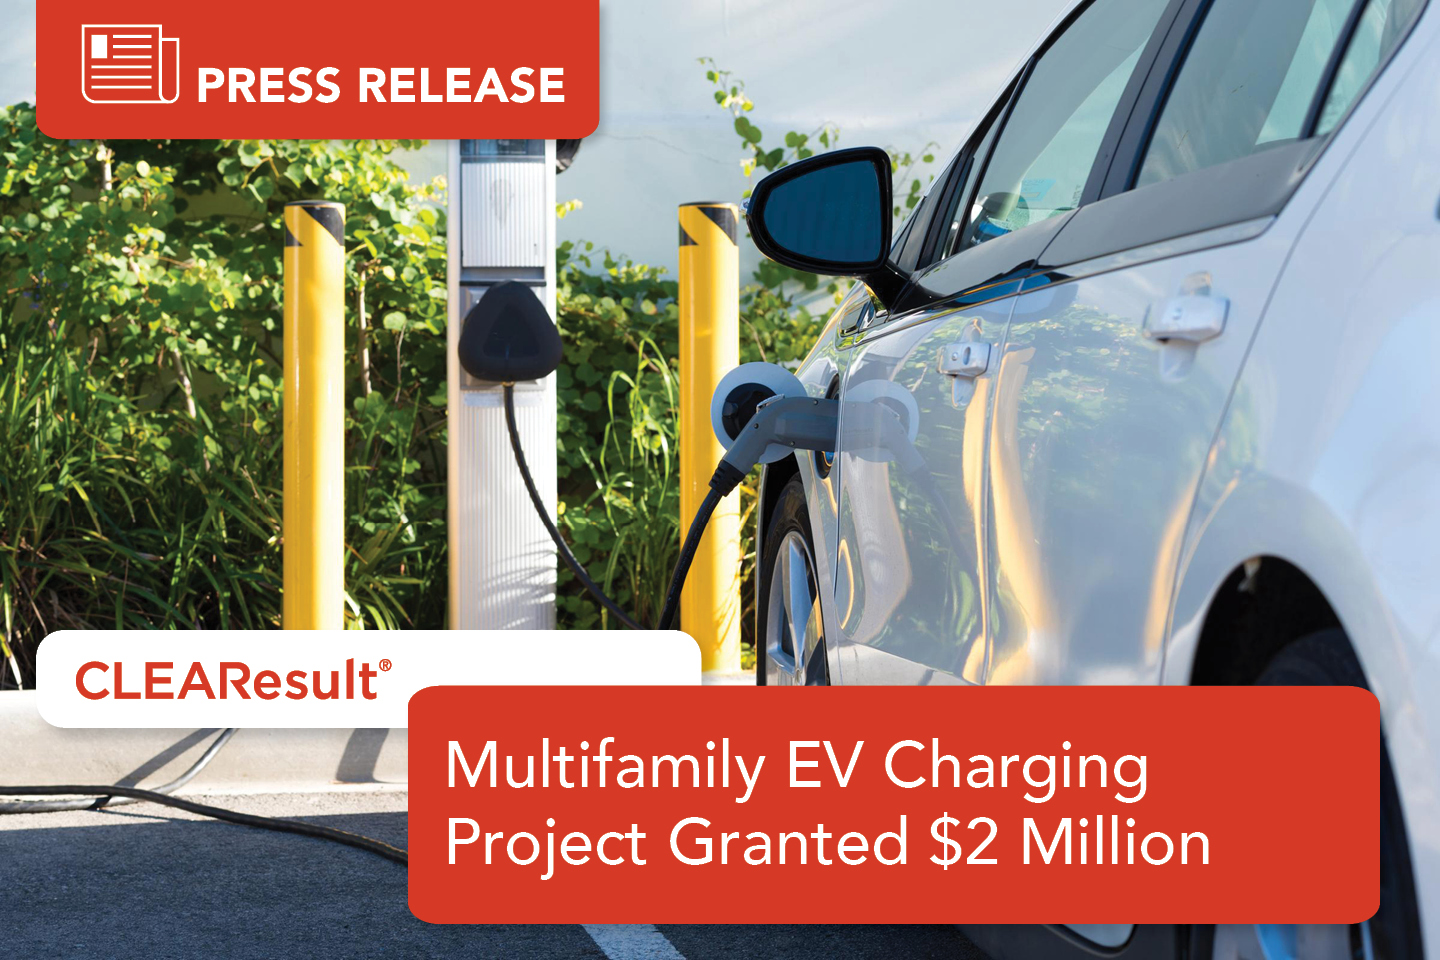 CLEAResult’s California Multifamily EV Charging Project Granted $2 Million